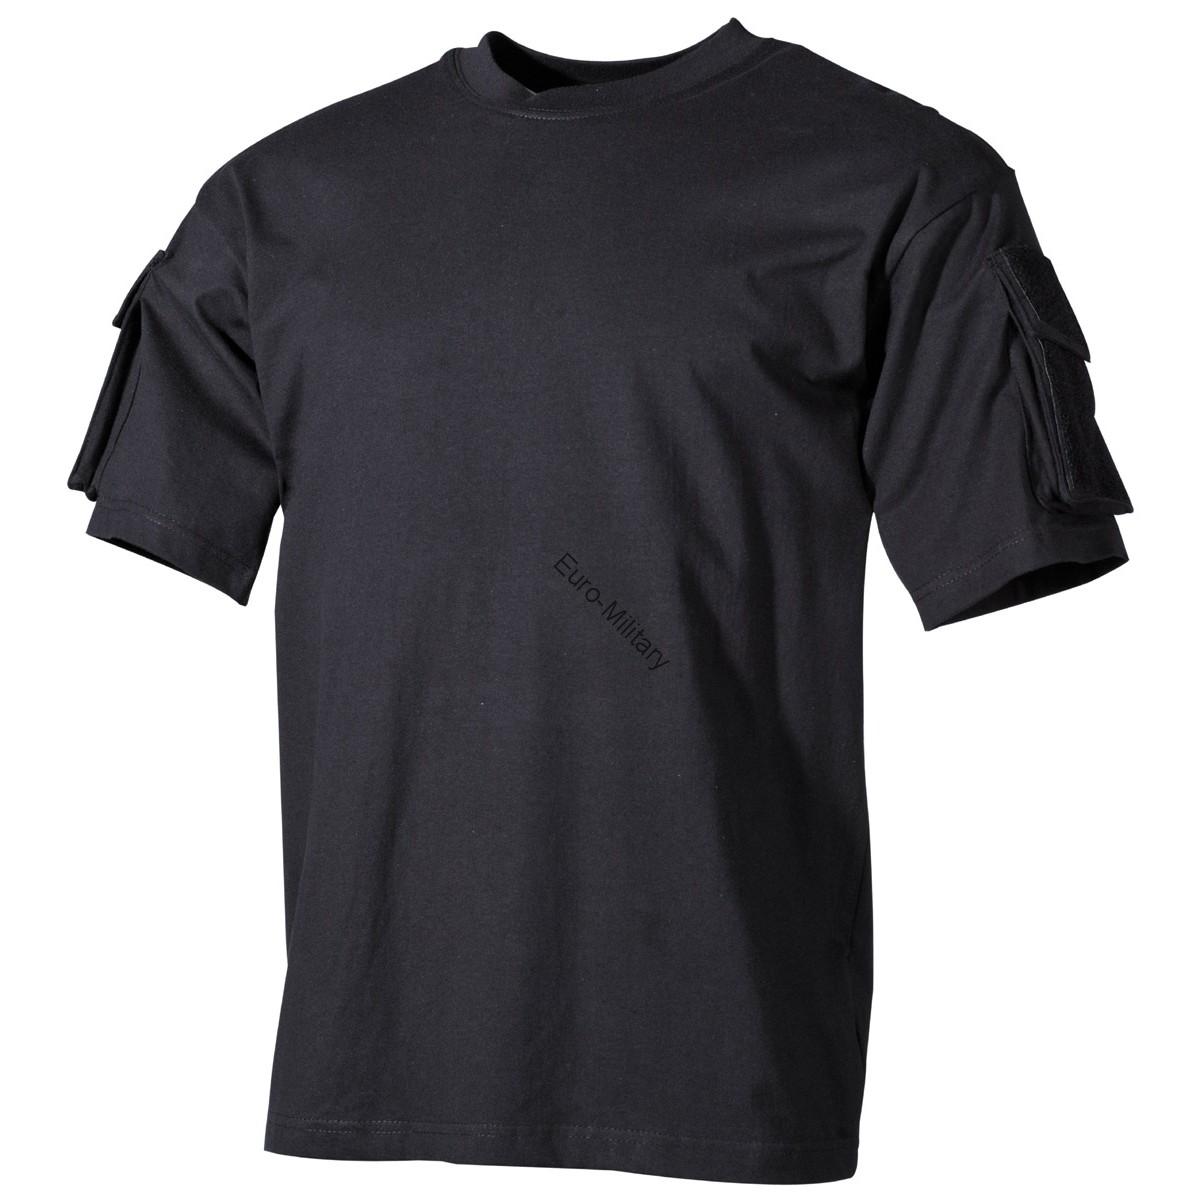 Tactical Military Army Special Ops Combat T-Shirt - Black - Short Sleeve